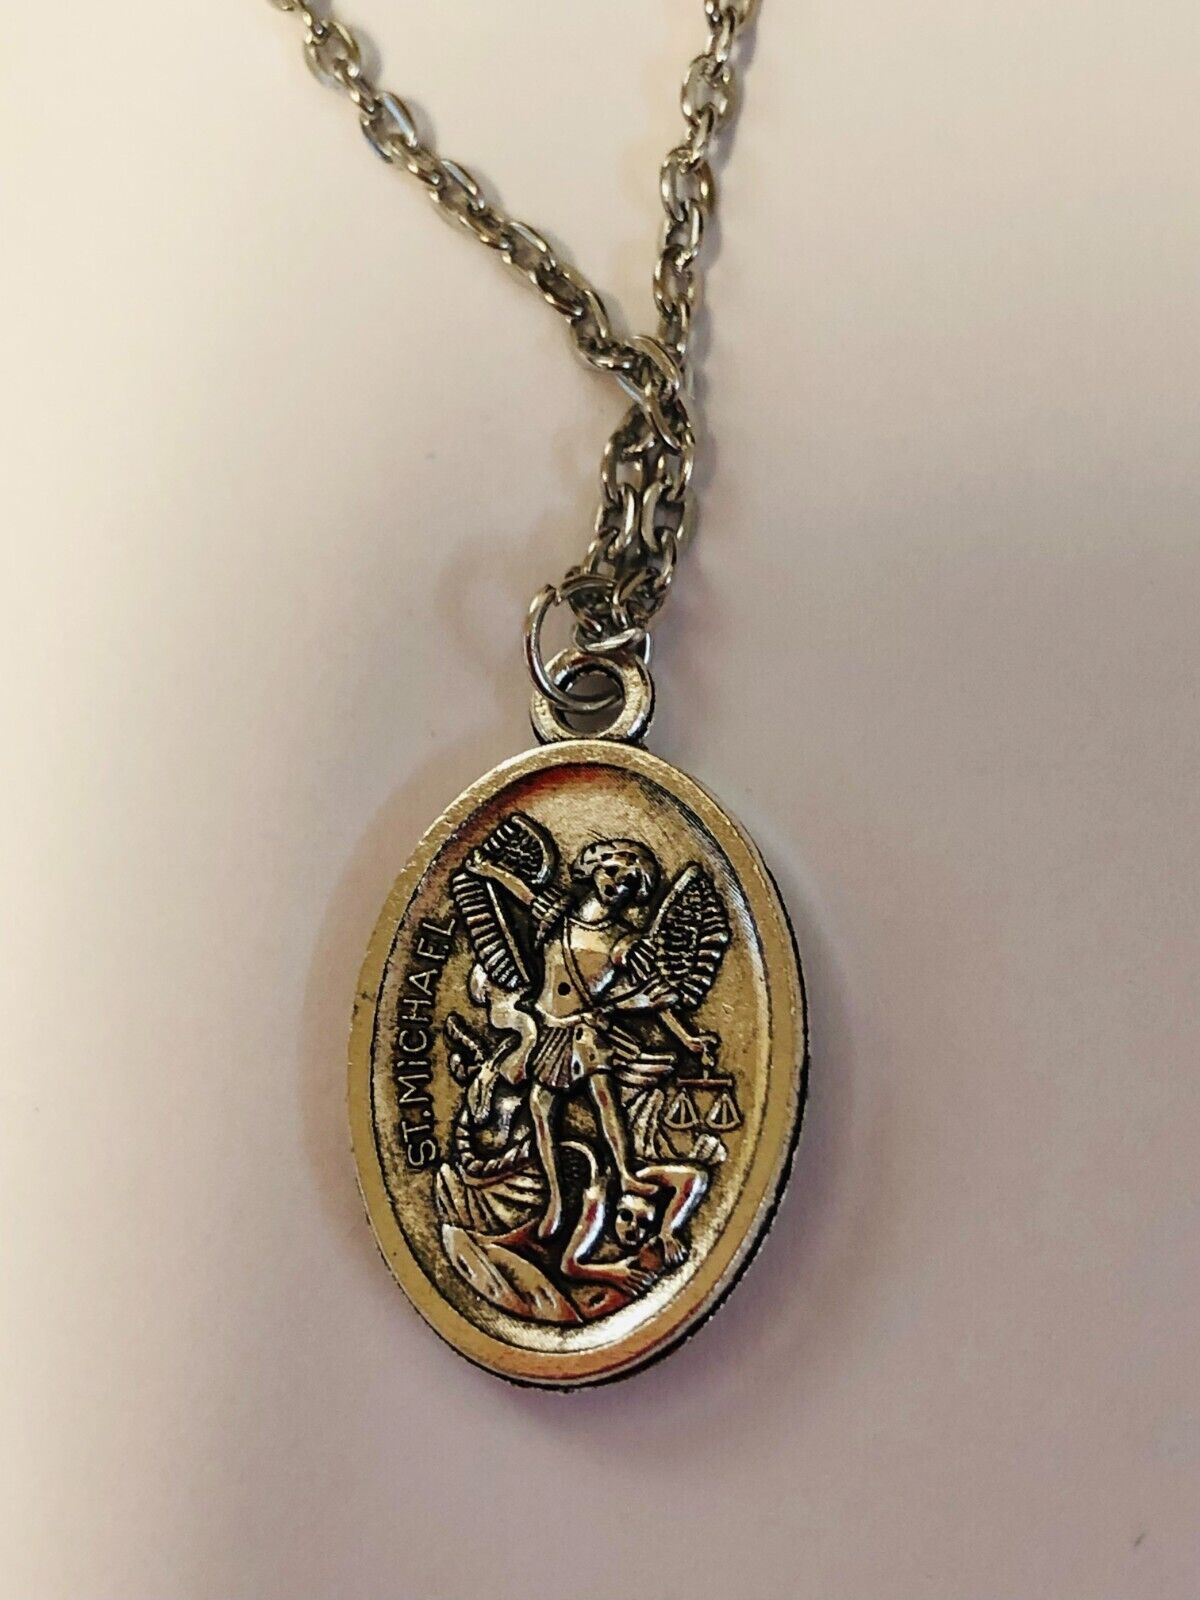 Saint Michael the Archangel/Guardian Angel 2 Sided Medal Necklace, New - Bob and Penny Lord